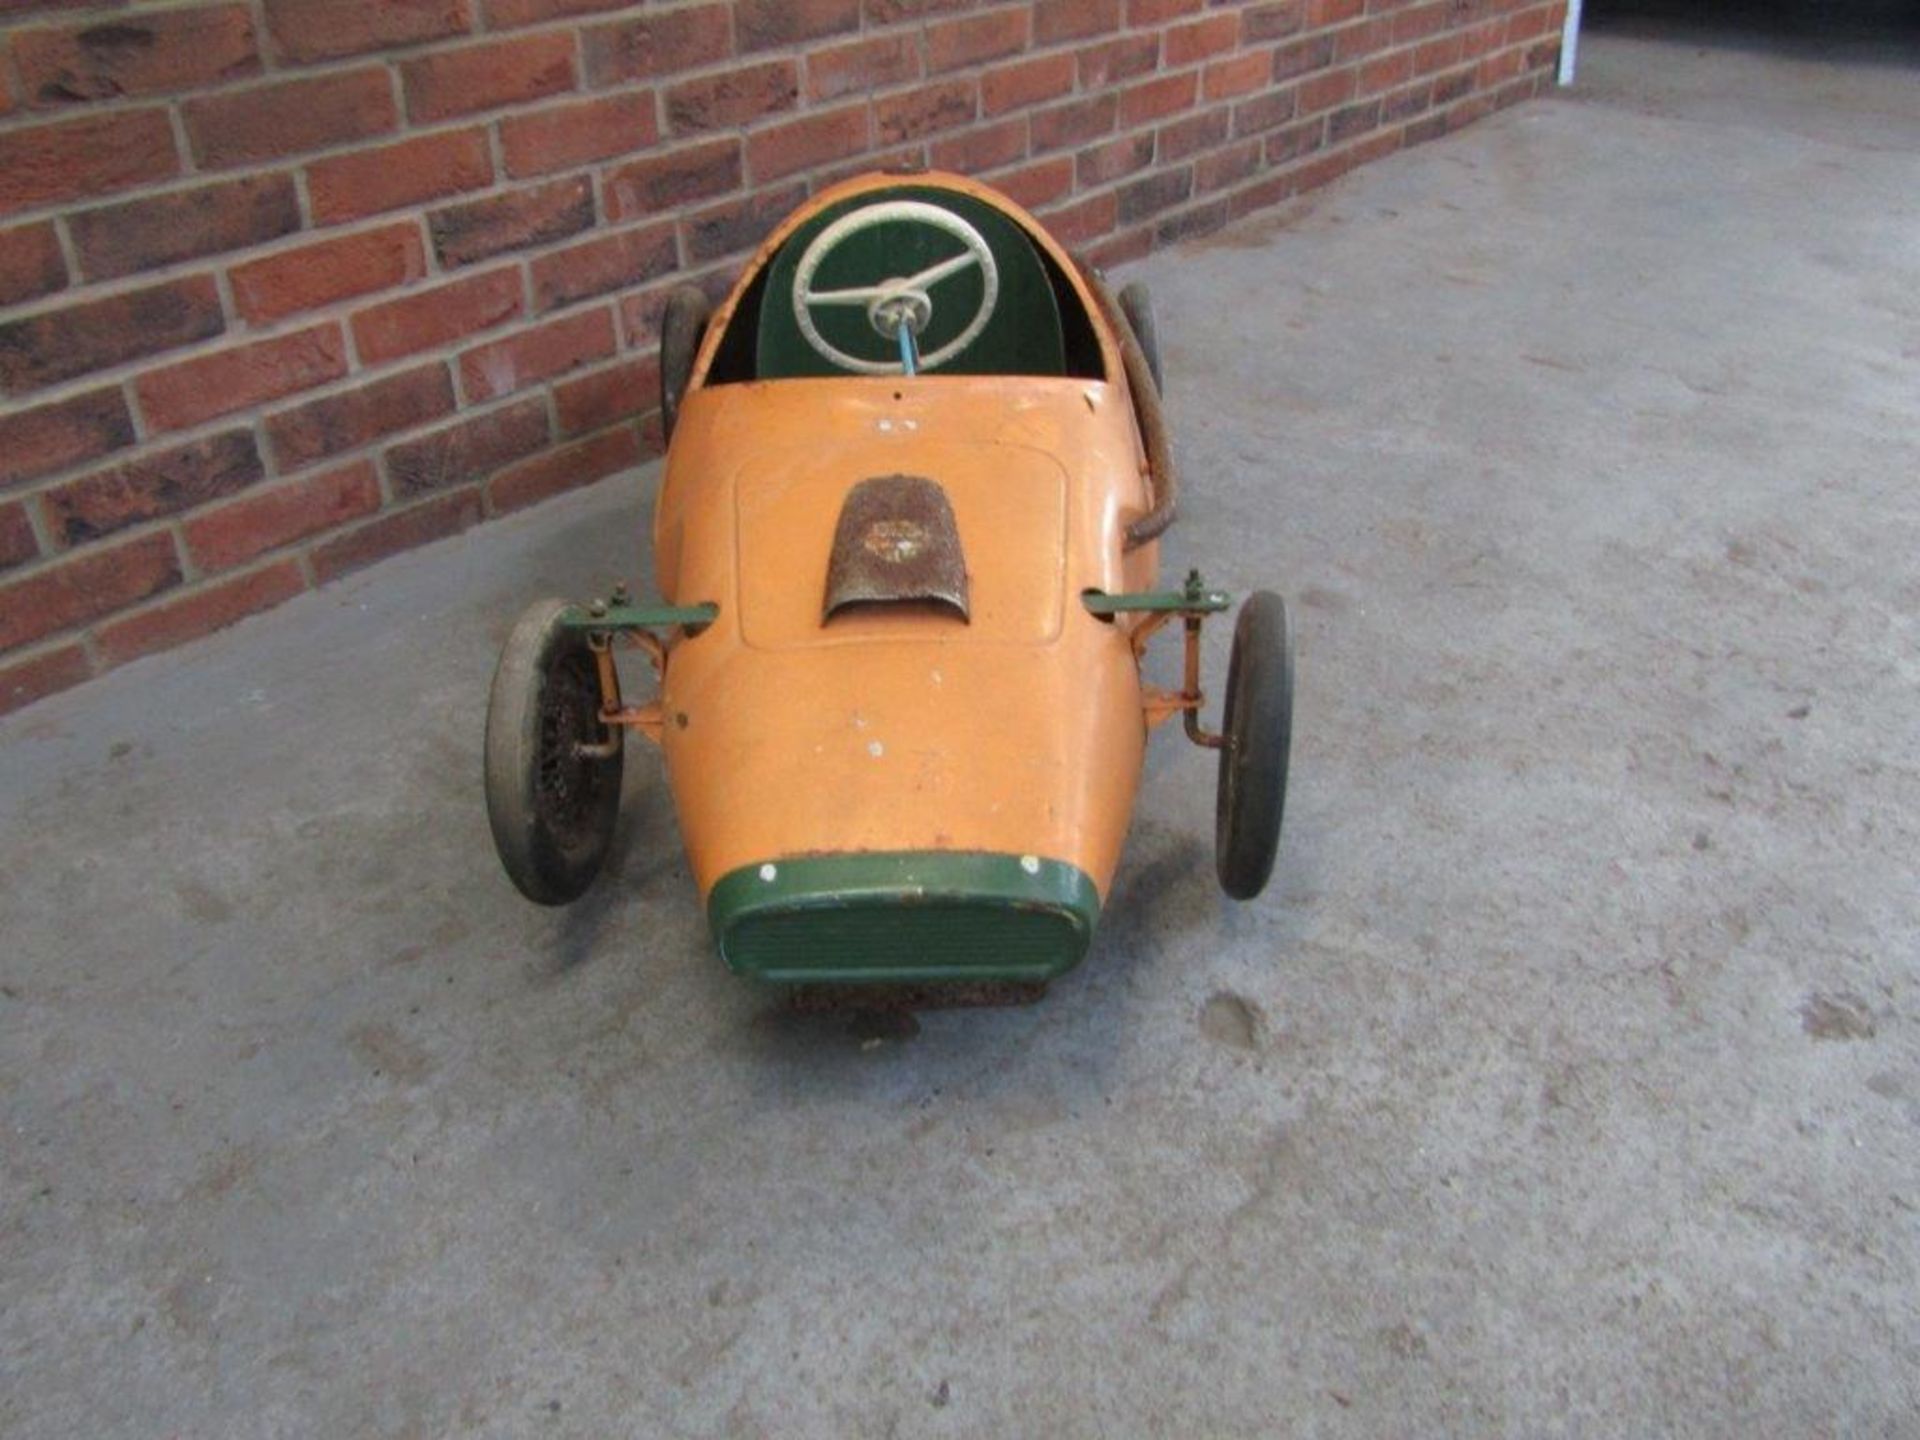 Vintage Triang Childs Racing Pedal Car - Image 2 of 5